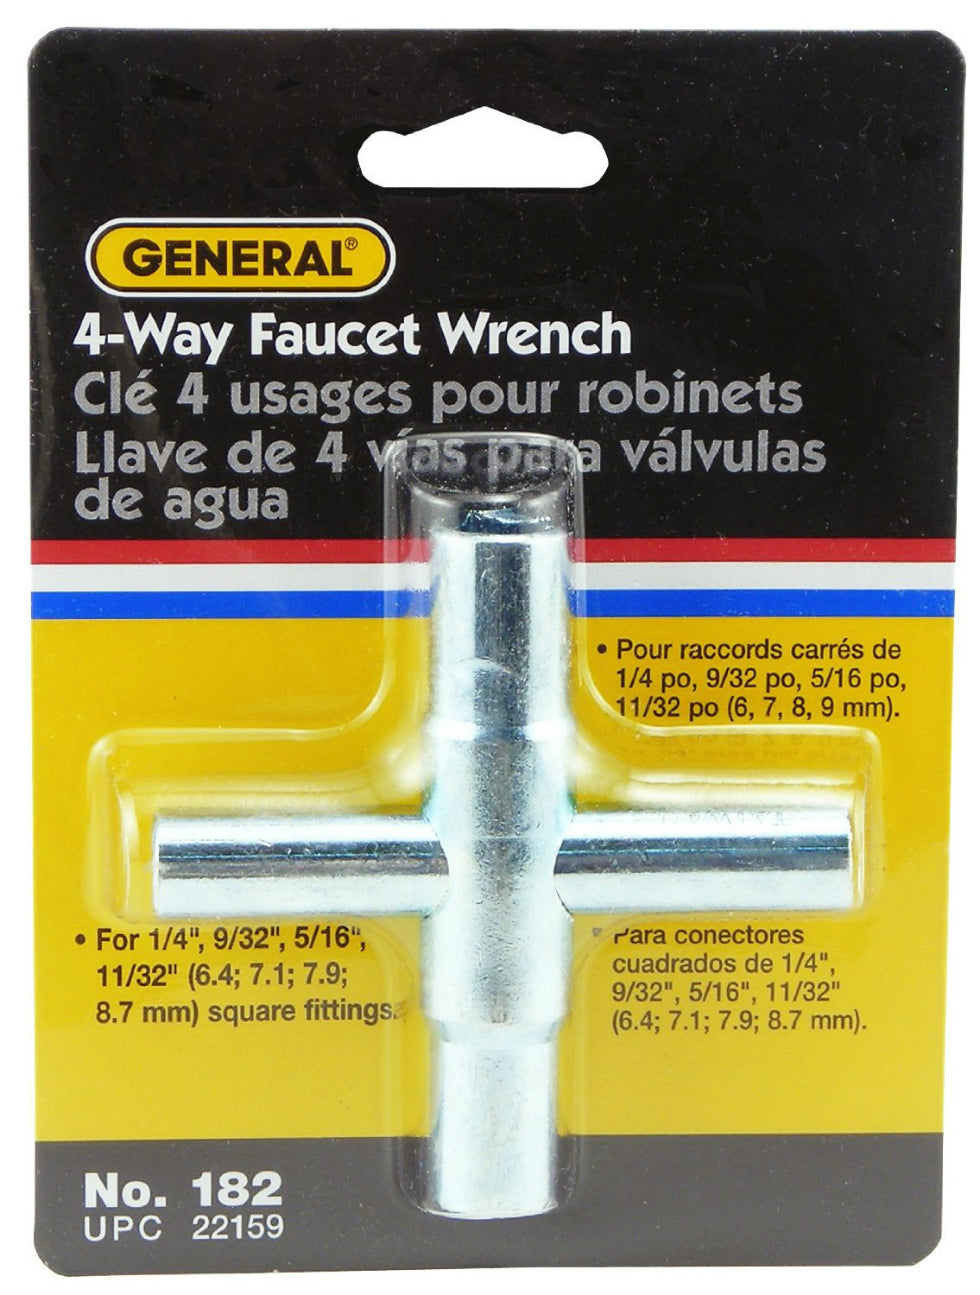 Buy 4 way faucet wrench - Online store for mechanics tools, specialty wrenches in USA, on sale, low price, discount deals, coupon code